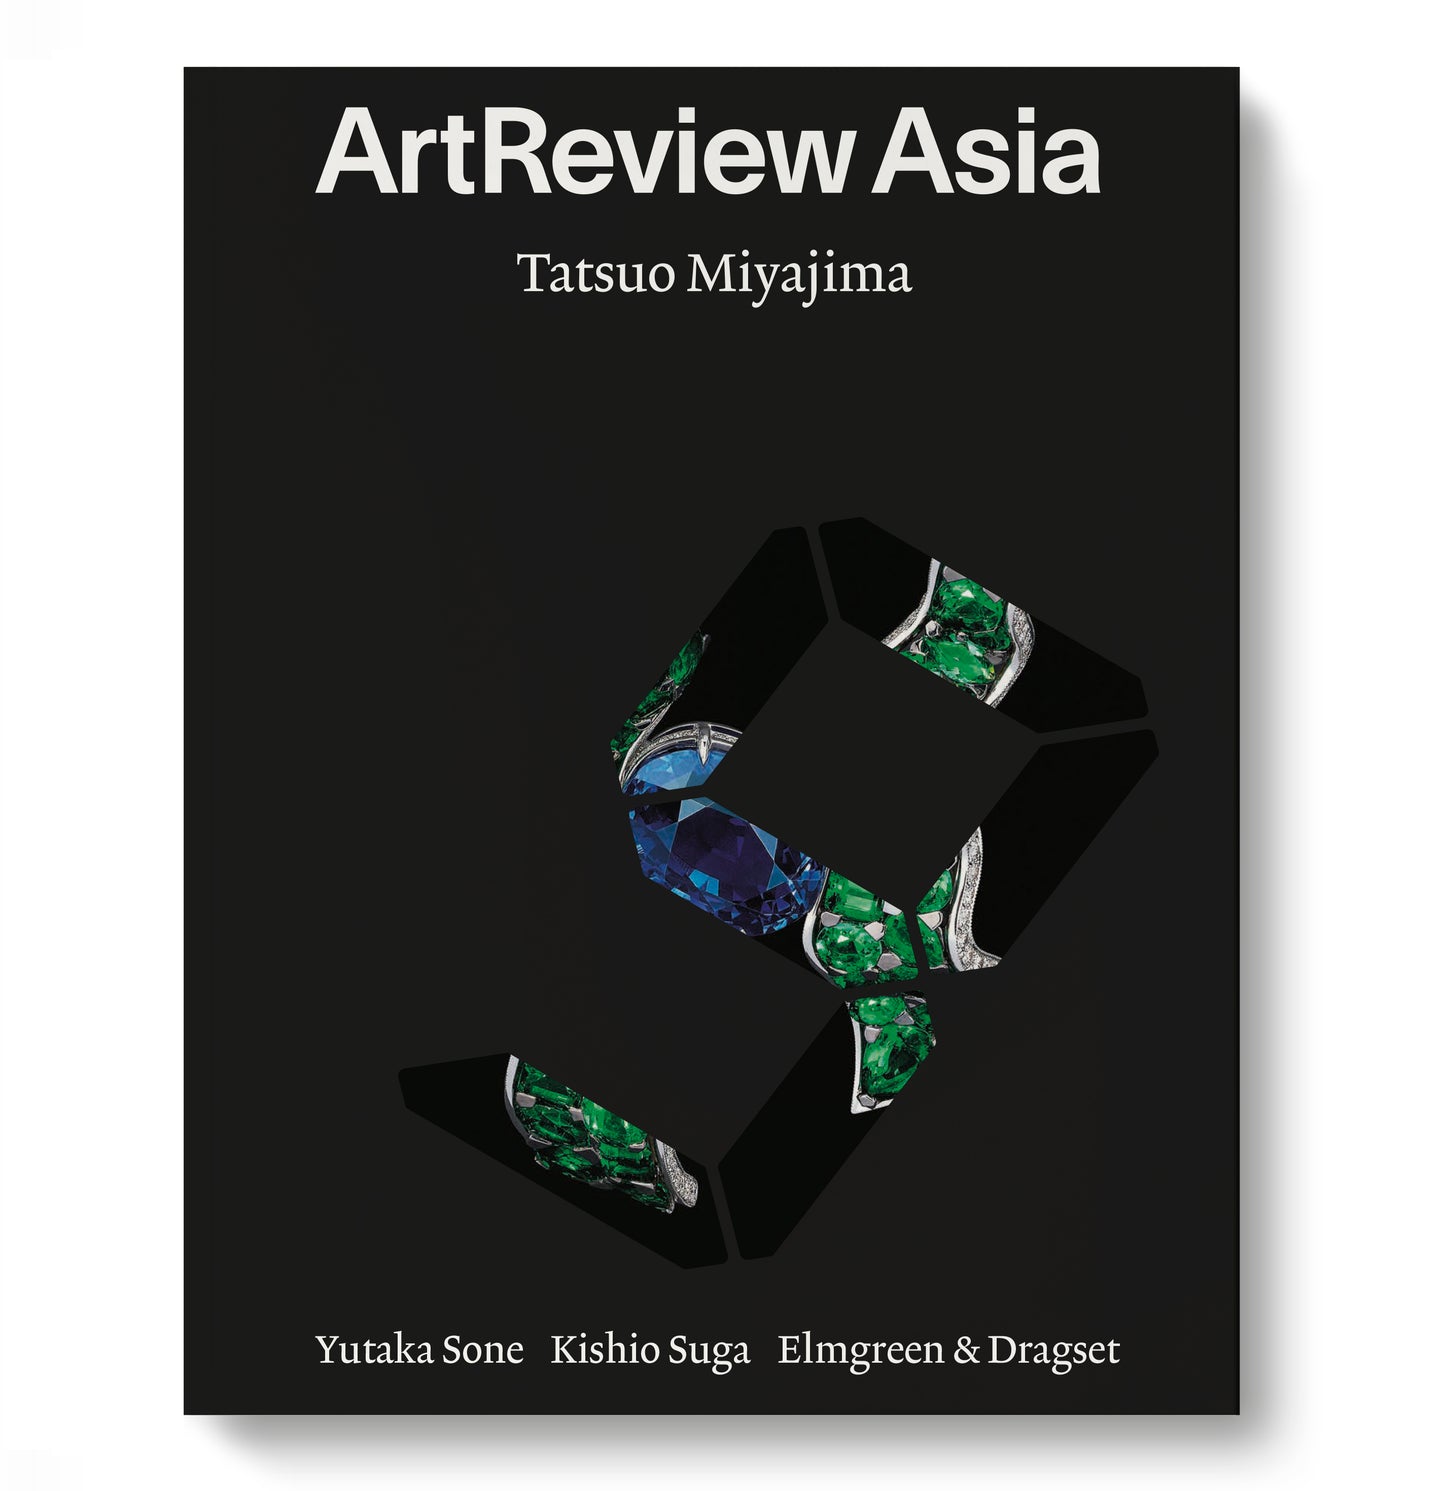 ArtReview Asia Spring 2016